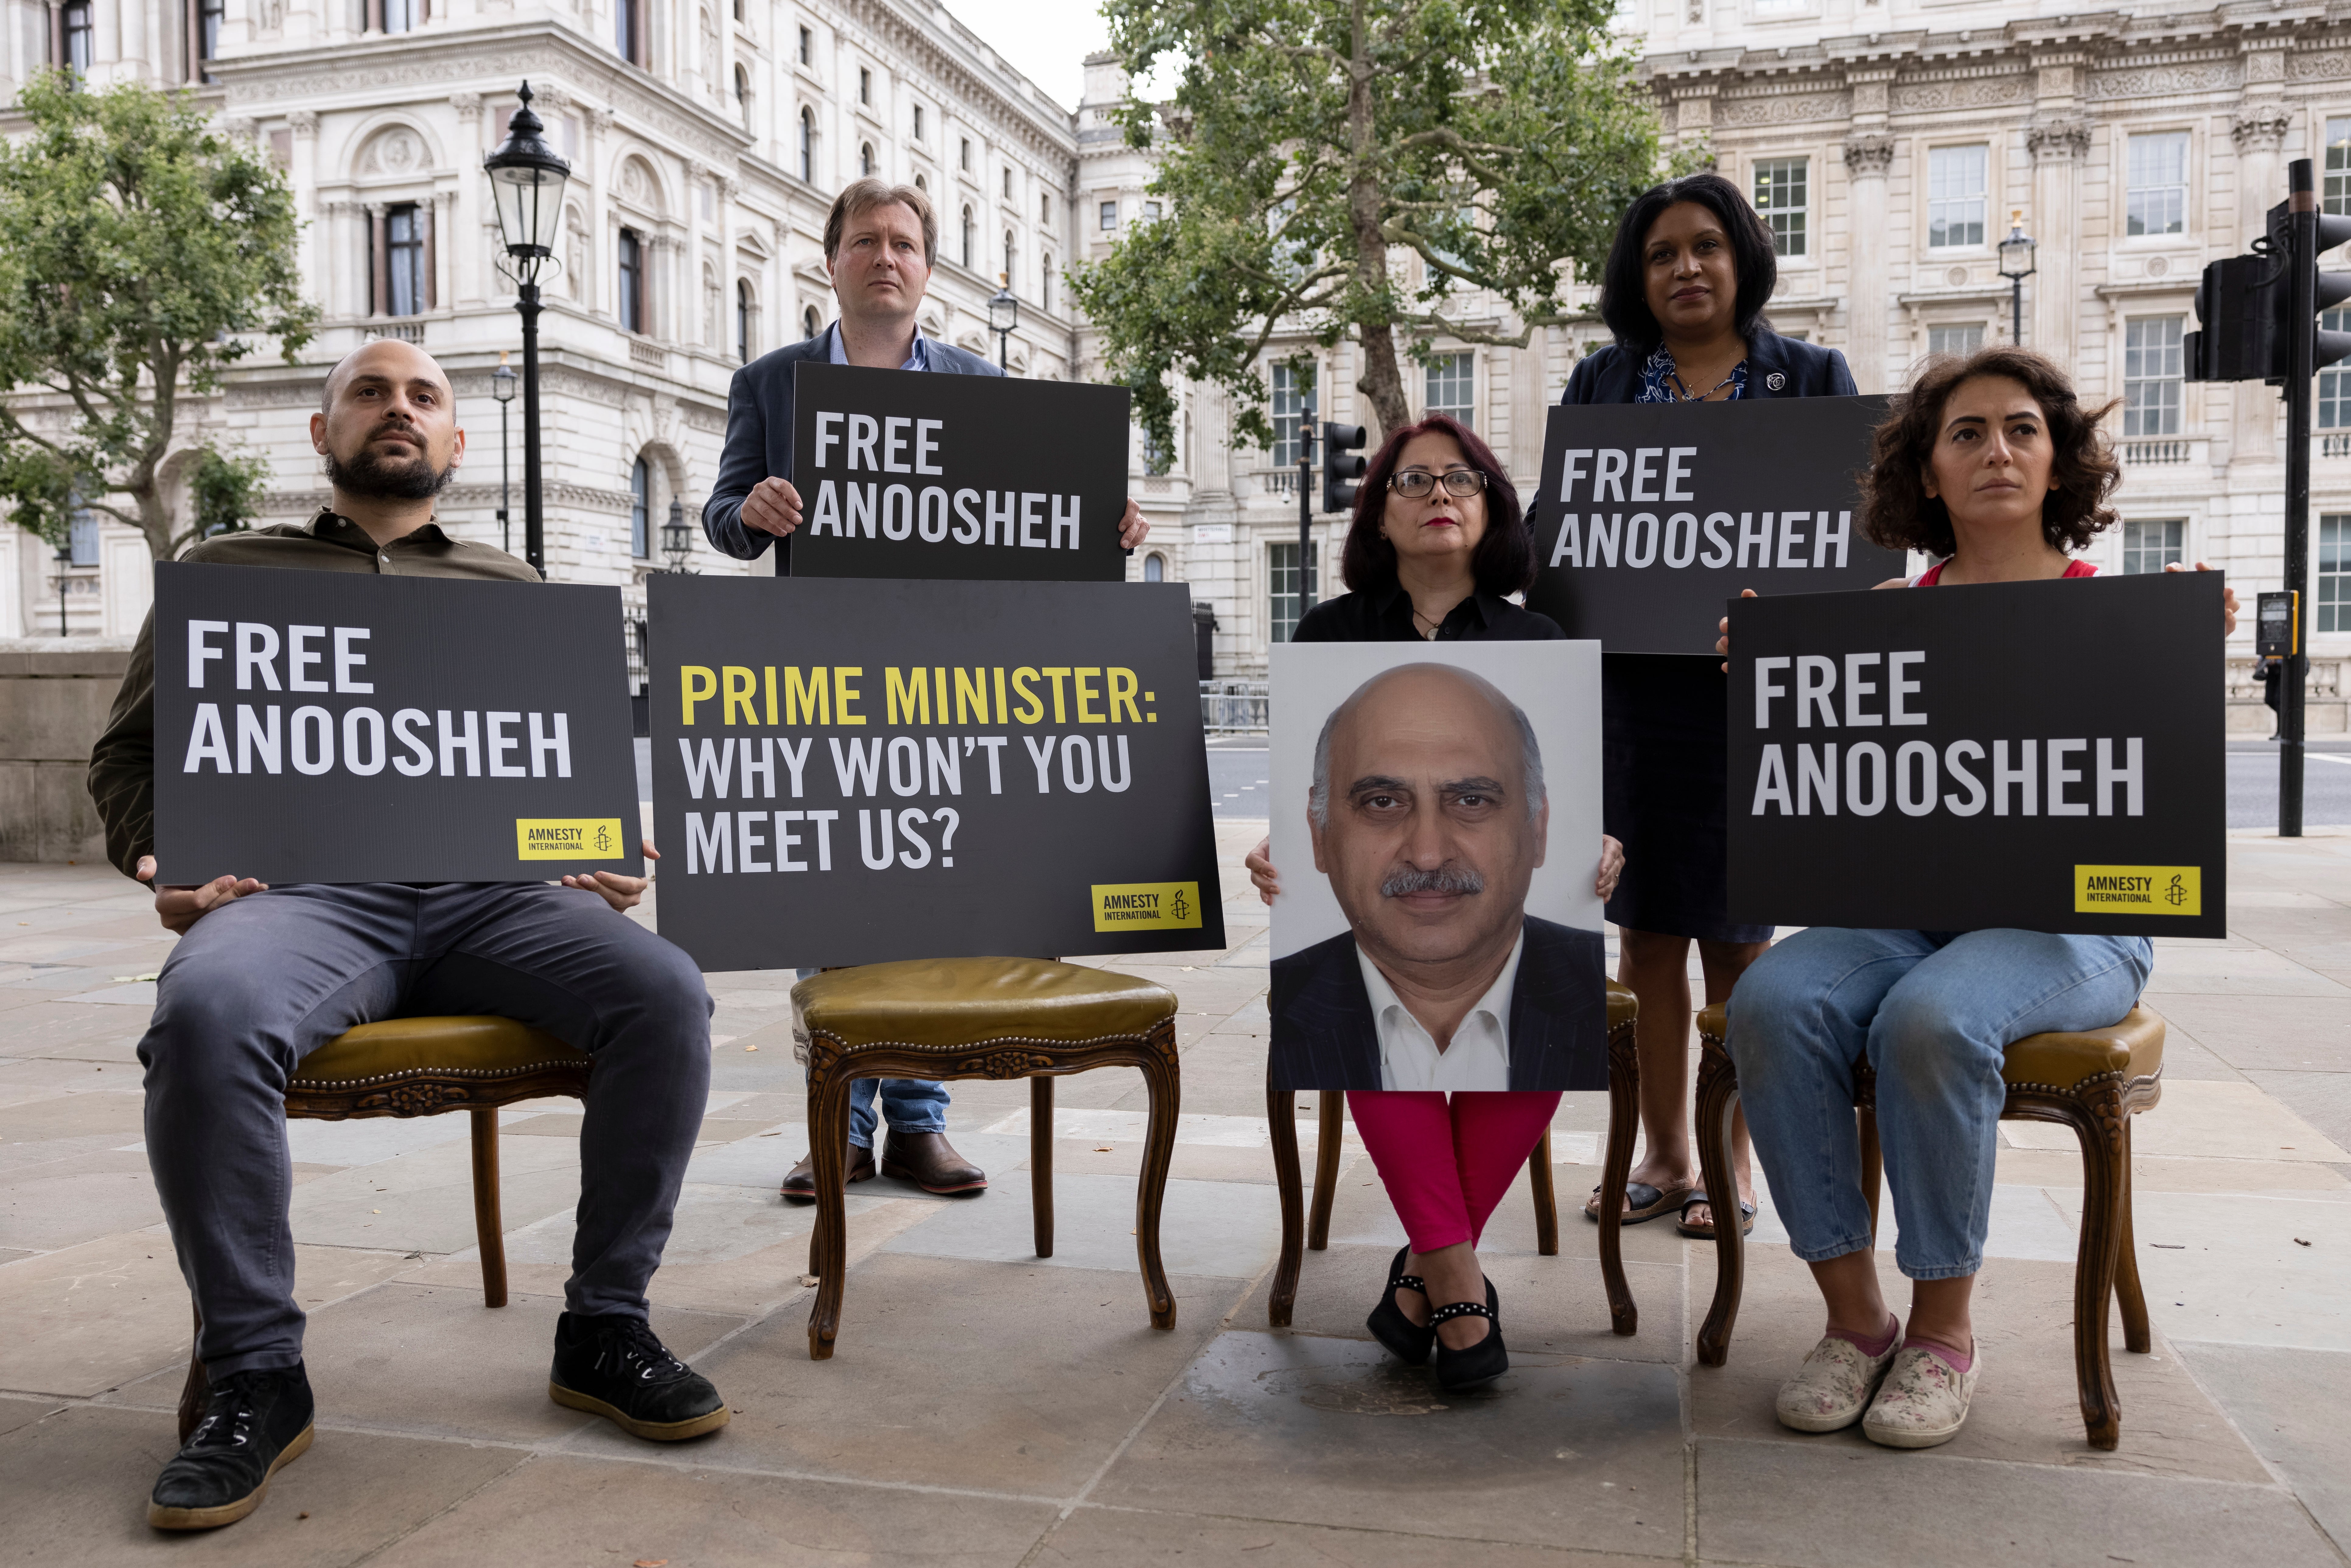 The family of Anoosheh Ashoori, a british man currently jailed in Iran, staged an an empty chair protest opposite Downing Street to 'highlight the need for Boris Johnson to meet them to discuss his plight.' They were joined by Richard Ratcliffe, the husband of Nazanin Zaghari-Ratcliffe and MP for Lewisham East Janet Daby.